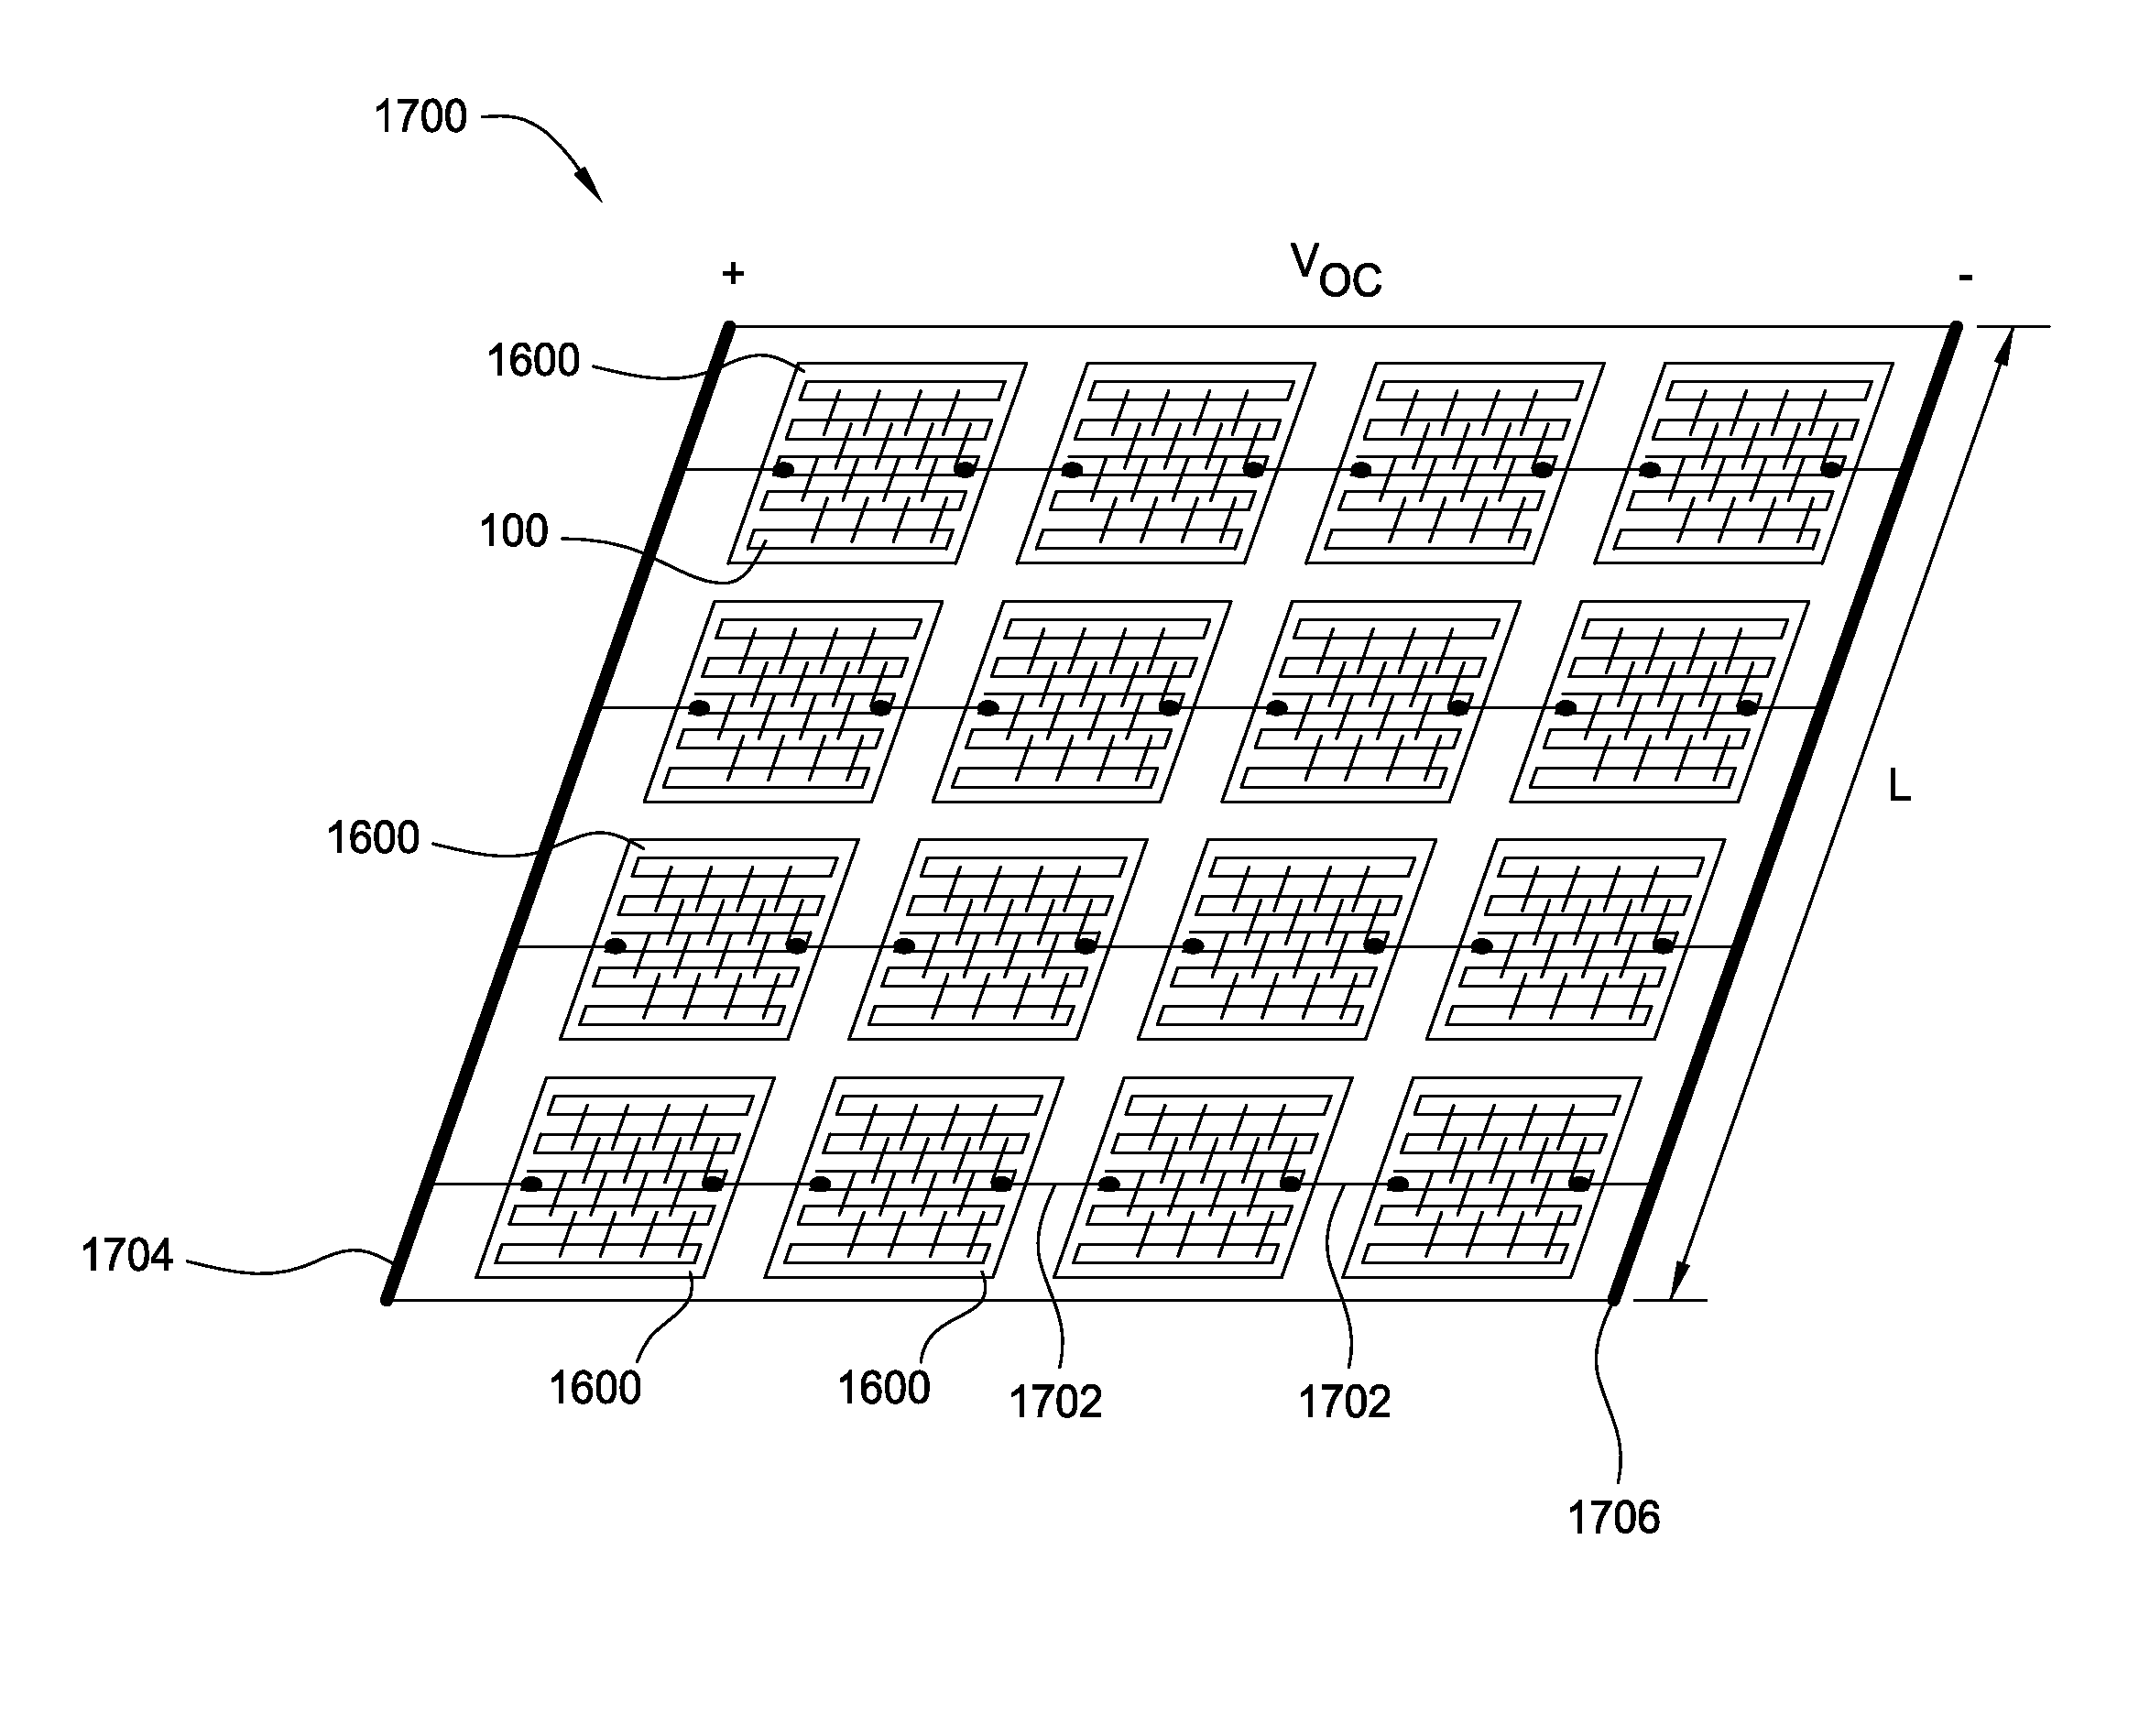 Integration of a photovoltaic device